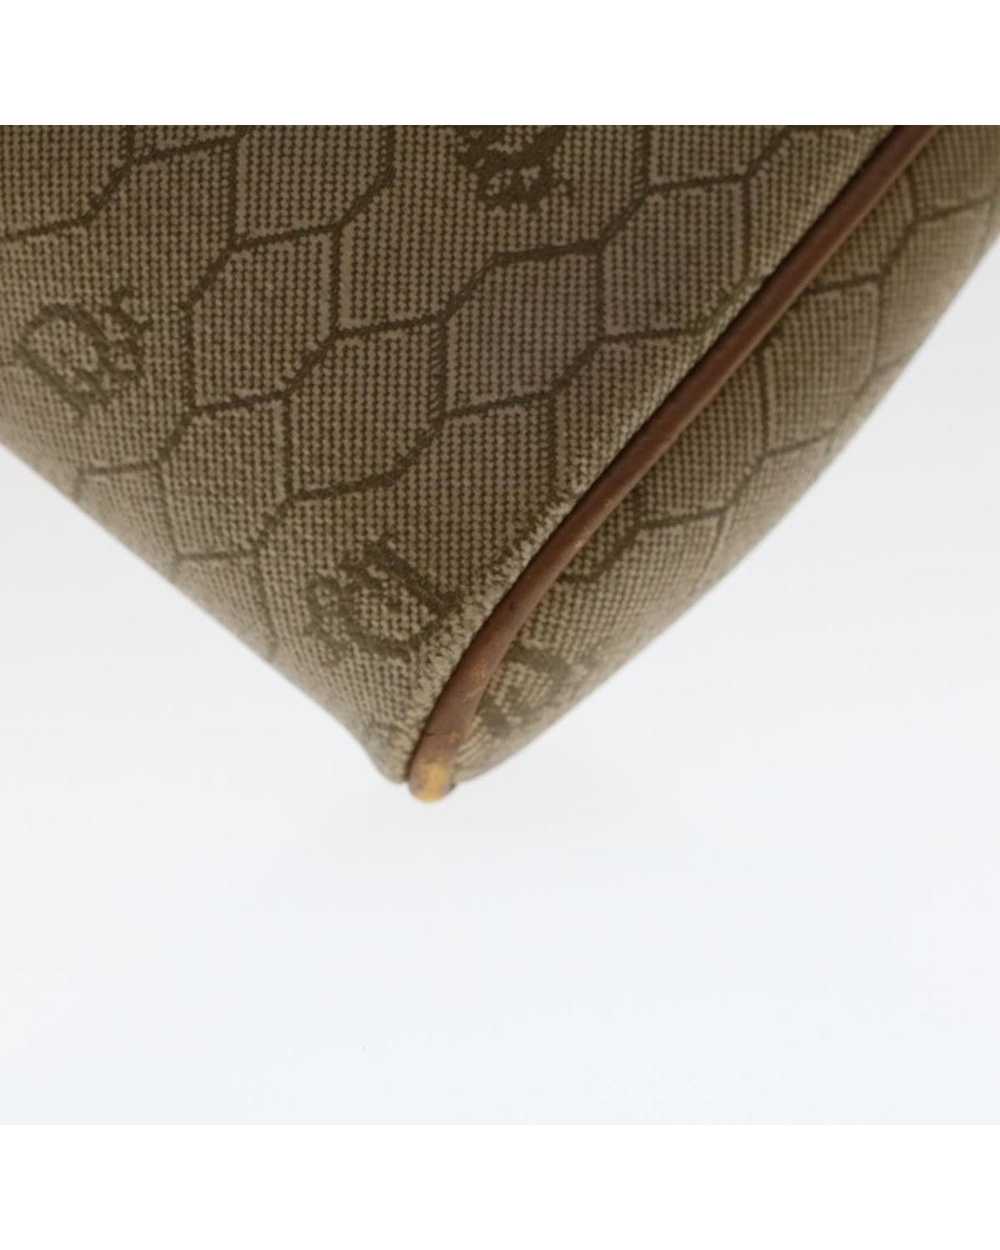 Dior Honeycomb Canvas Clutch by Dior - image 6